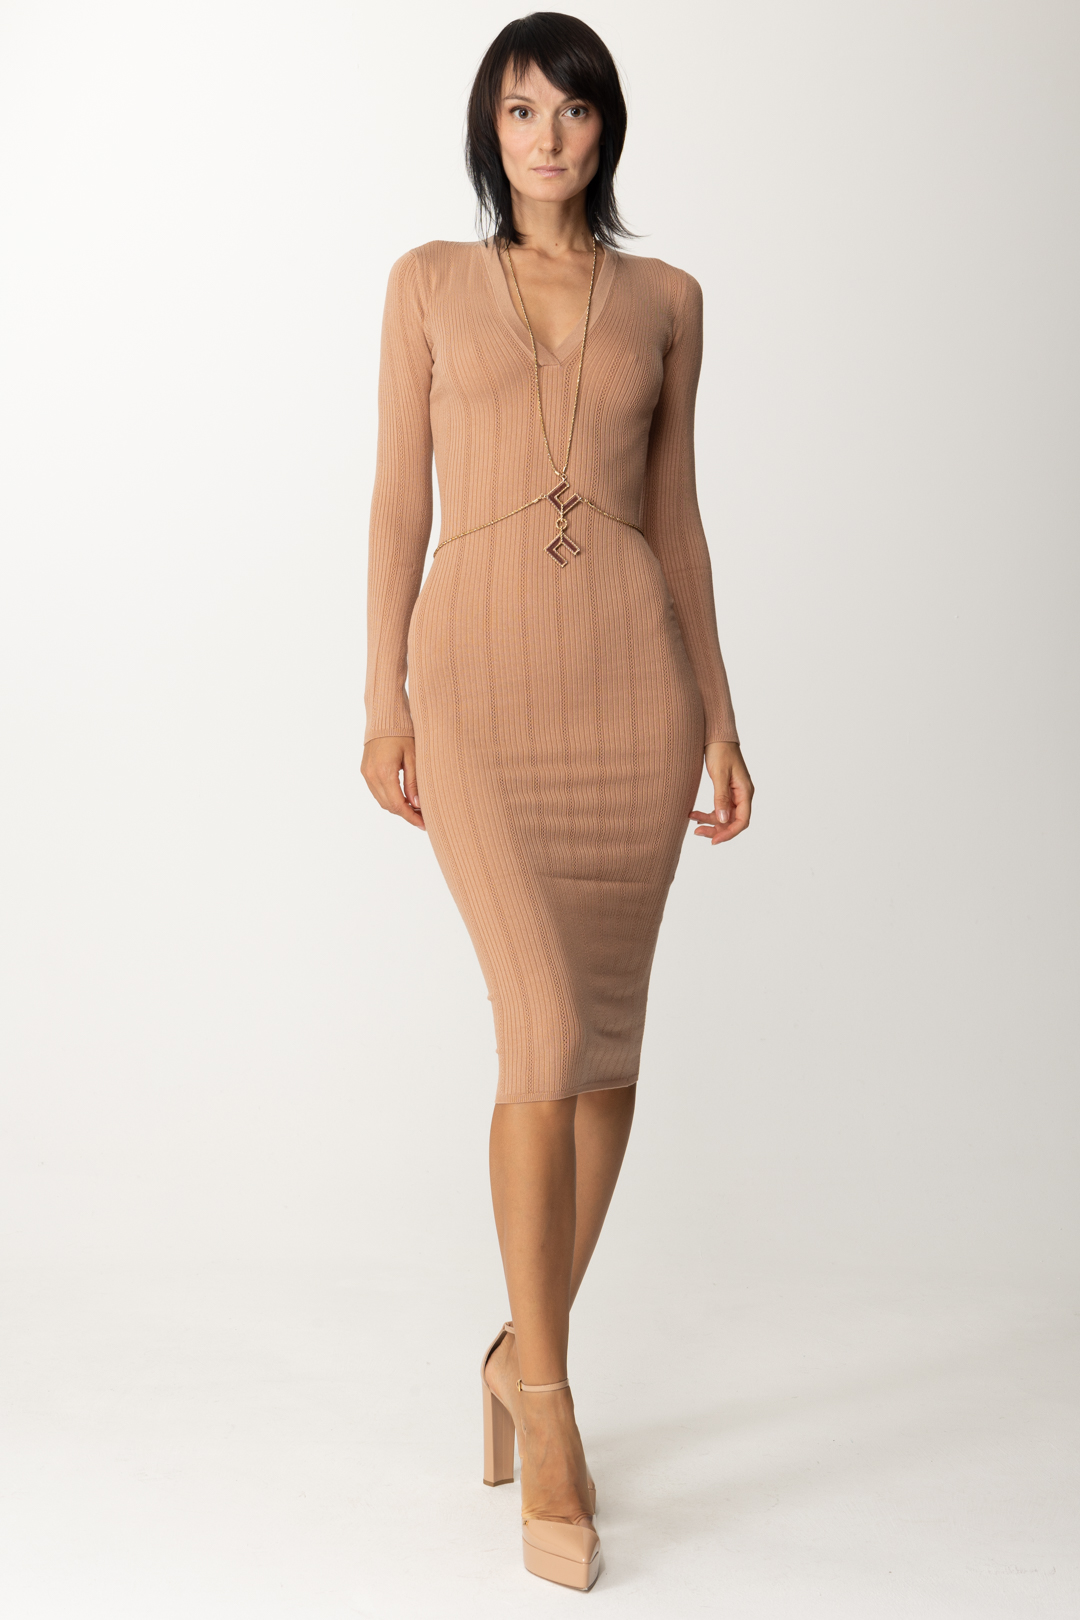 Preview: Elisabetta Franchi Knit dress with logo accessory SKIN